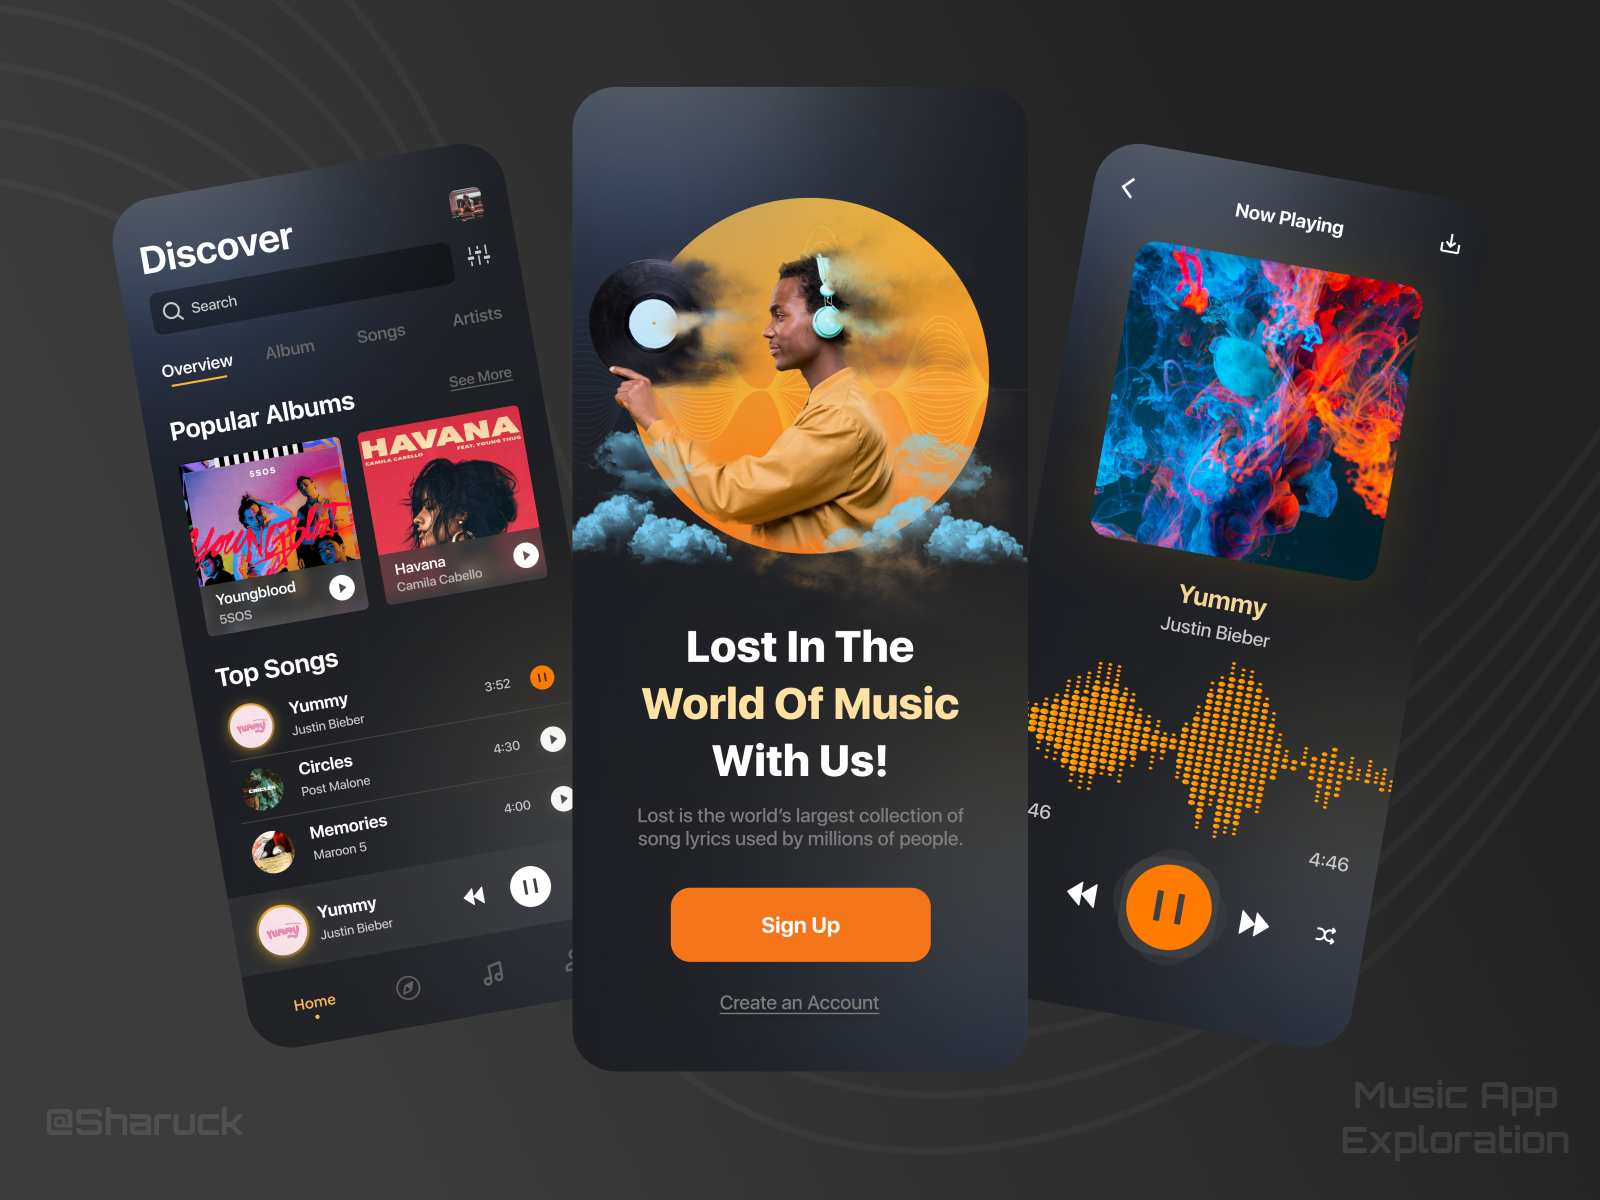 Lost - Music Streaming App Exploration by Sharuck on Dribbble